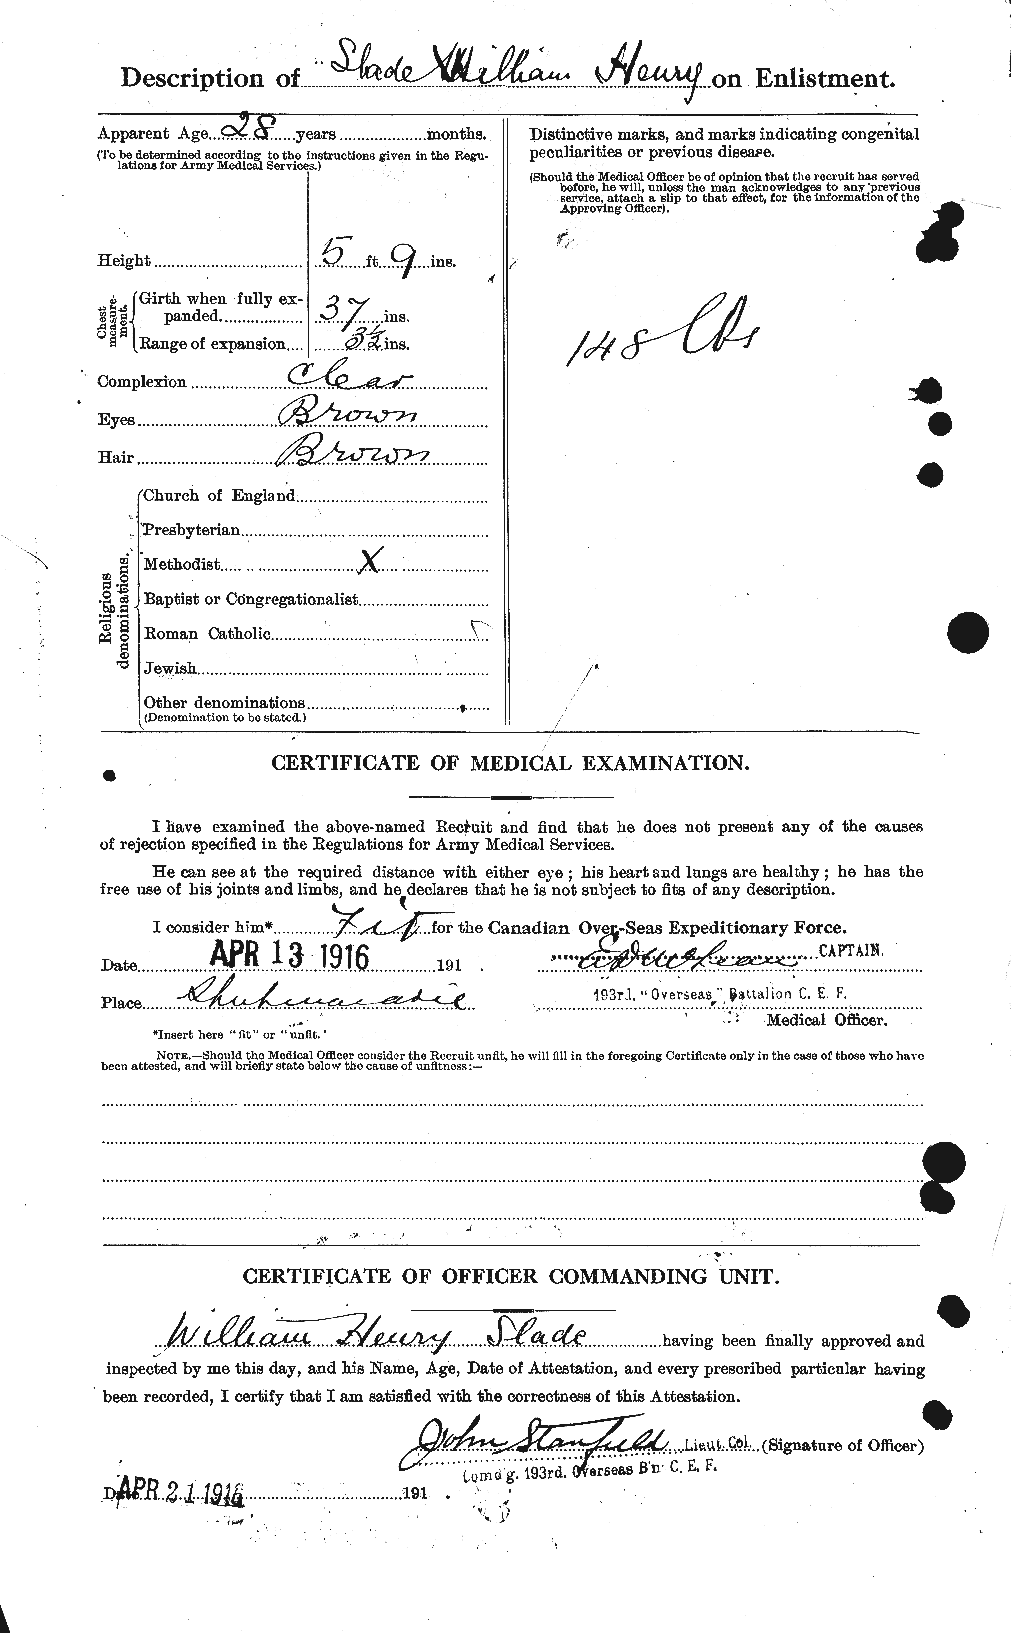 Personnel Records of the First World War - CEF 103551b